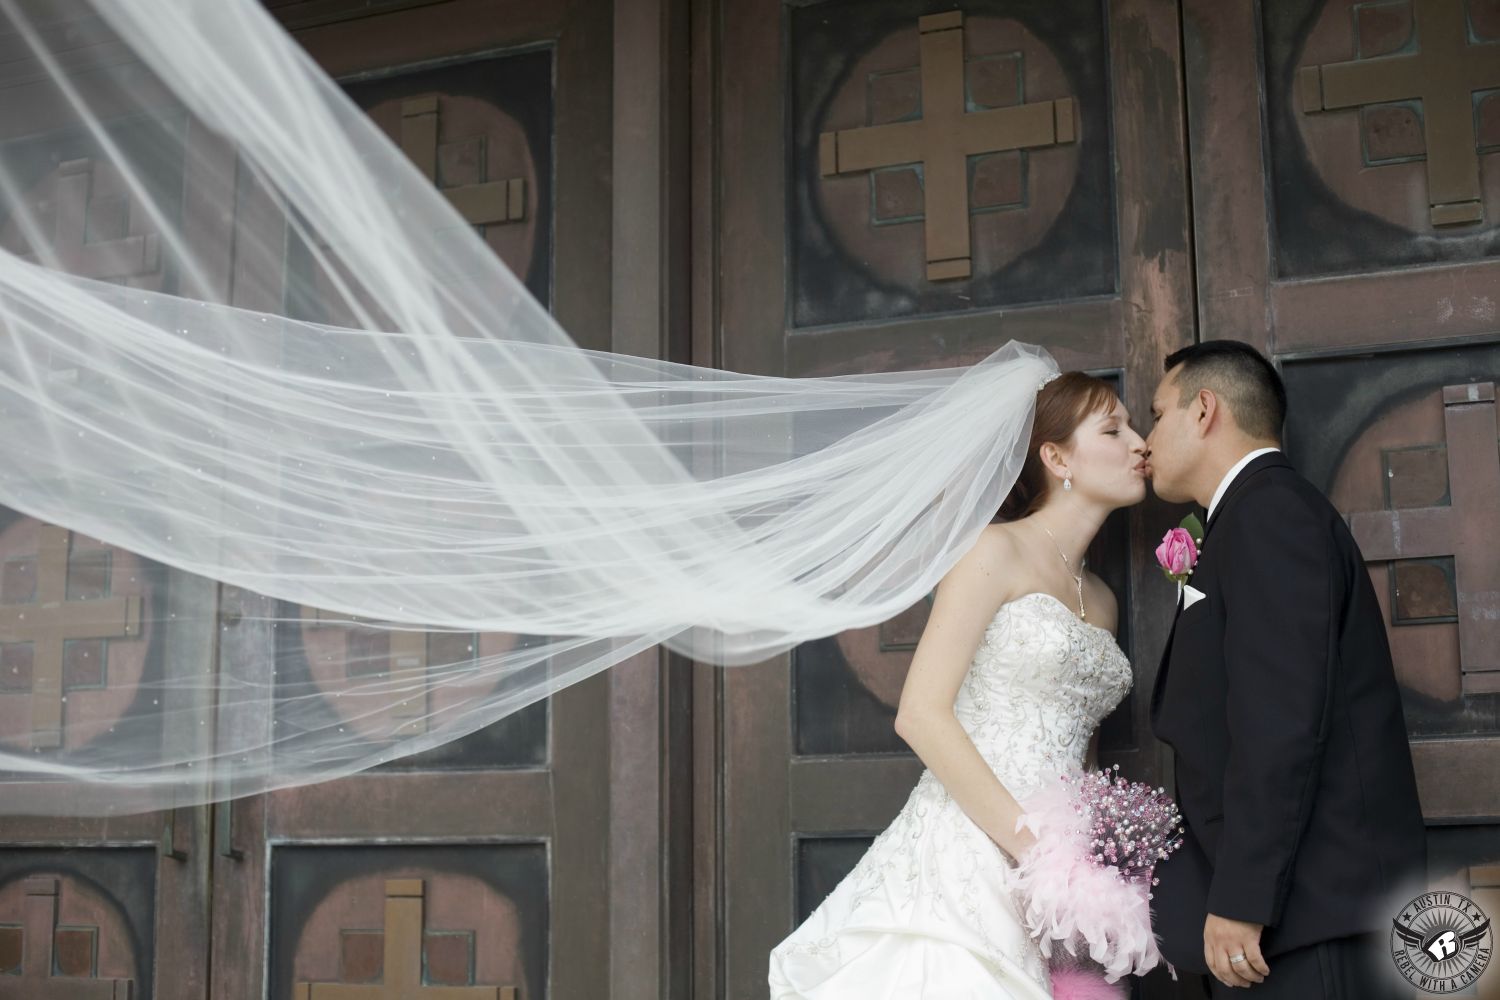 Brunette bride in sparkly white strapless wedding gown with pink feather and bling handmade bridal bouquet and groom with pink rose boutonniere kiss in front of bronze doors of Catholic church in Victoria, Texas, while her veil is lifted up across the frame.